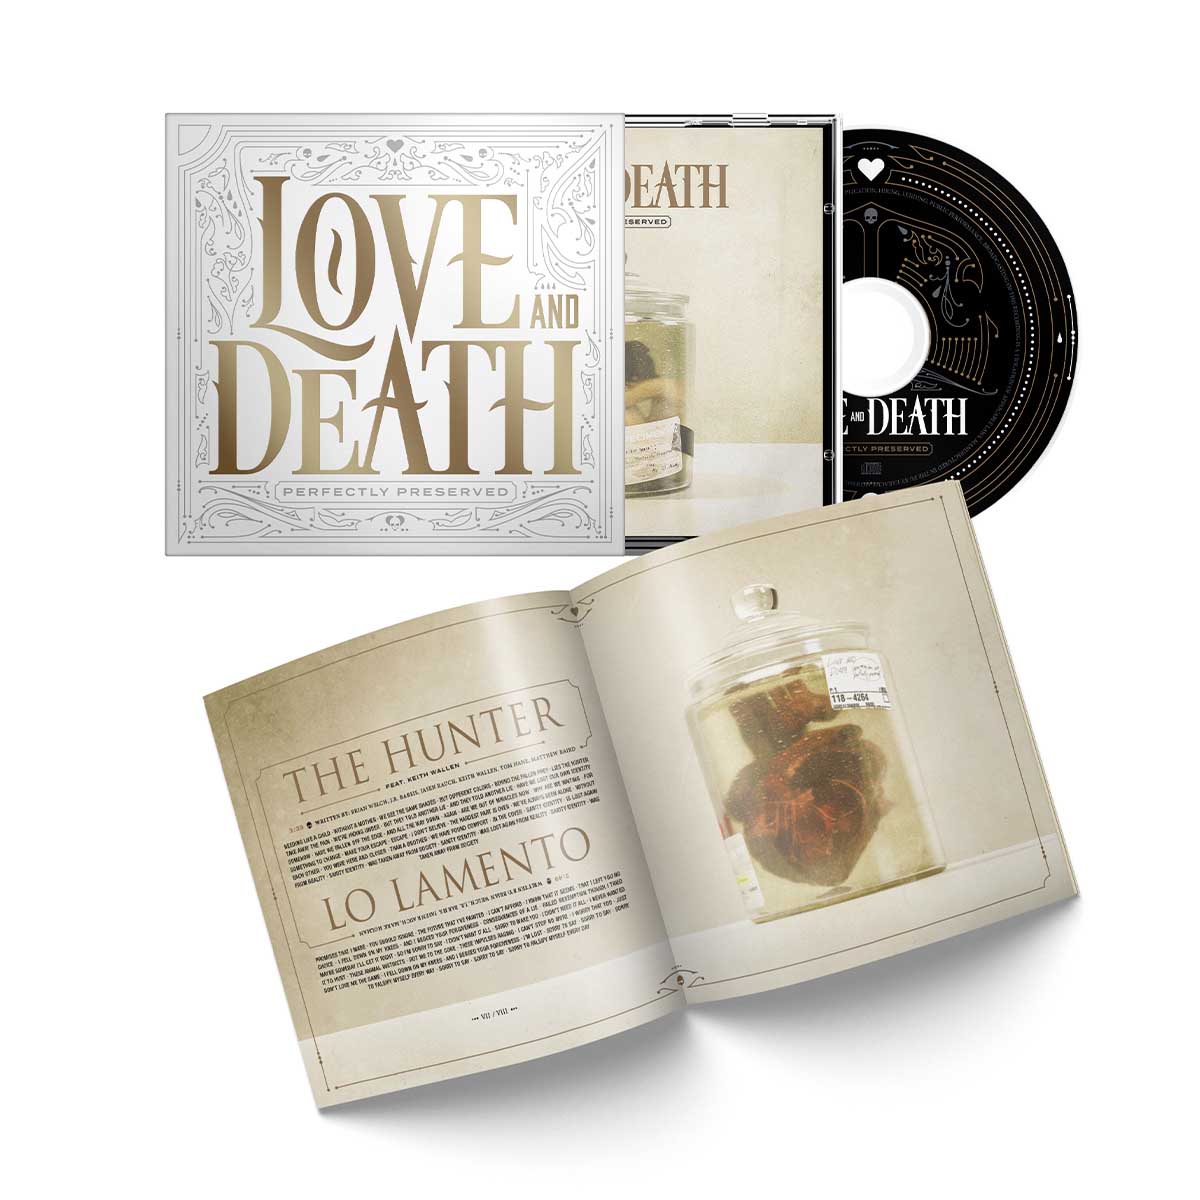 Love And Death "Perfectly Preserved" Slipcase CD